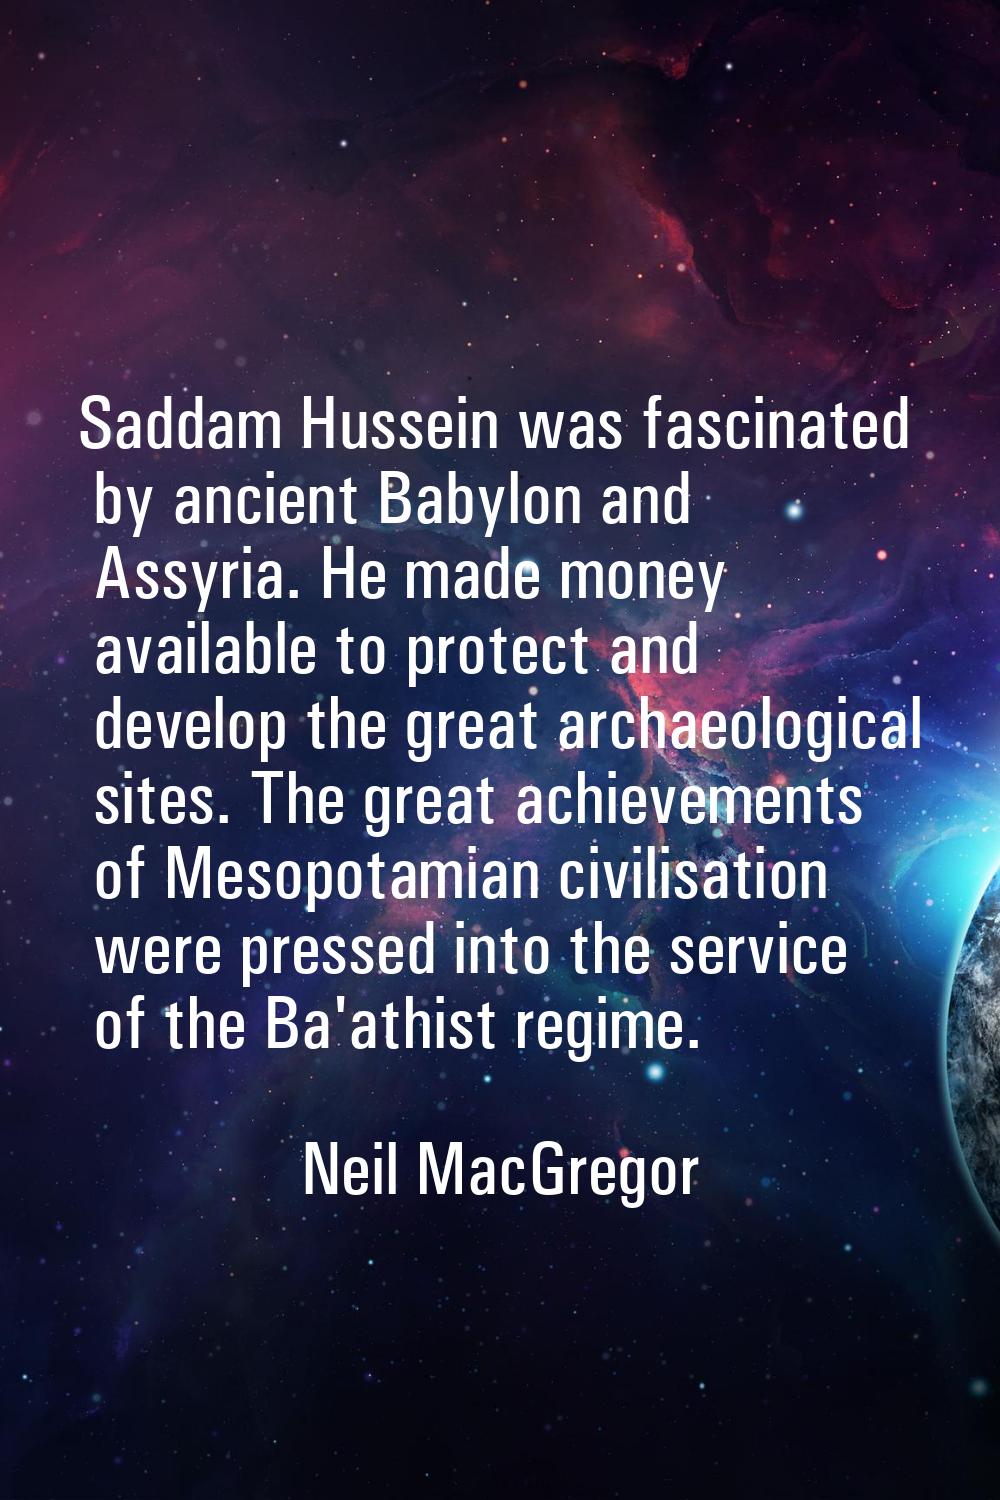 Saddam Hussein was fascinated by ancient Babylon and Assyria. He made money available to protect an